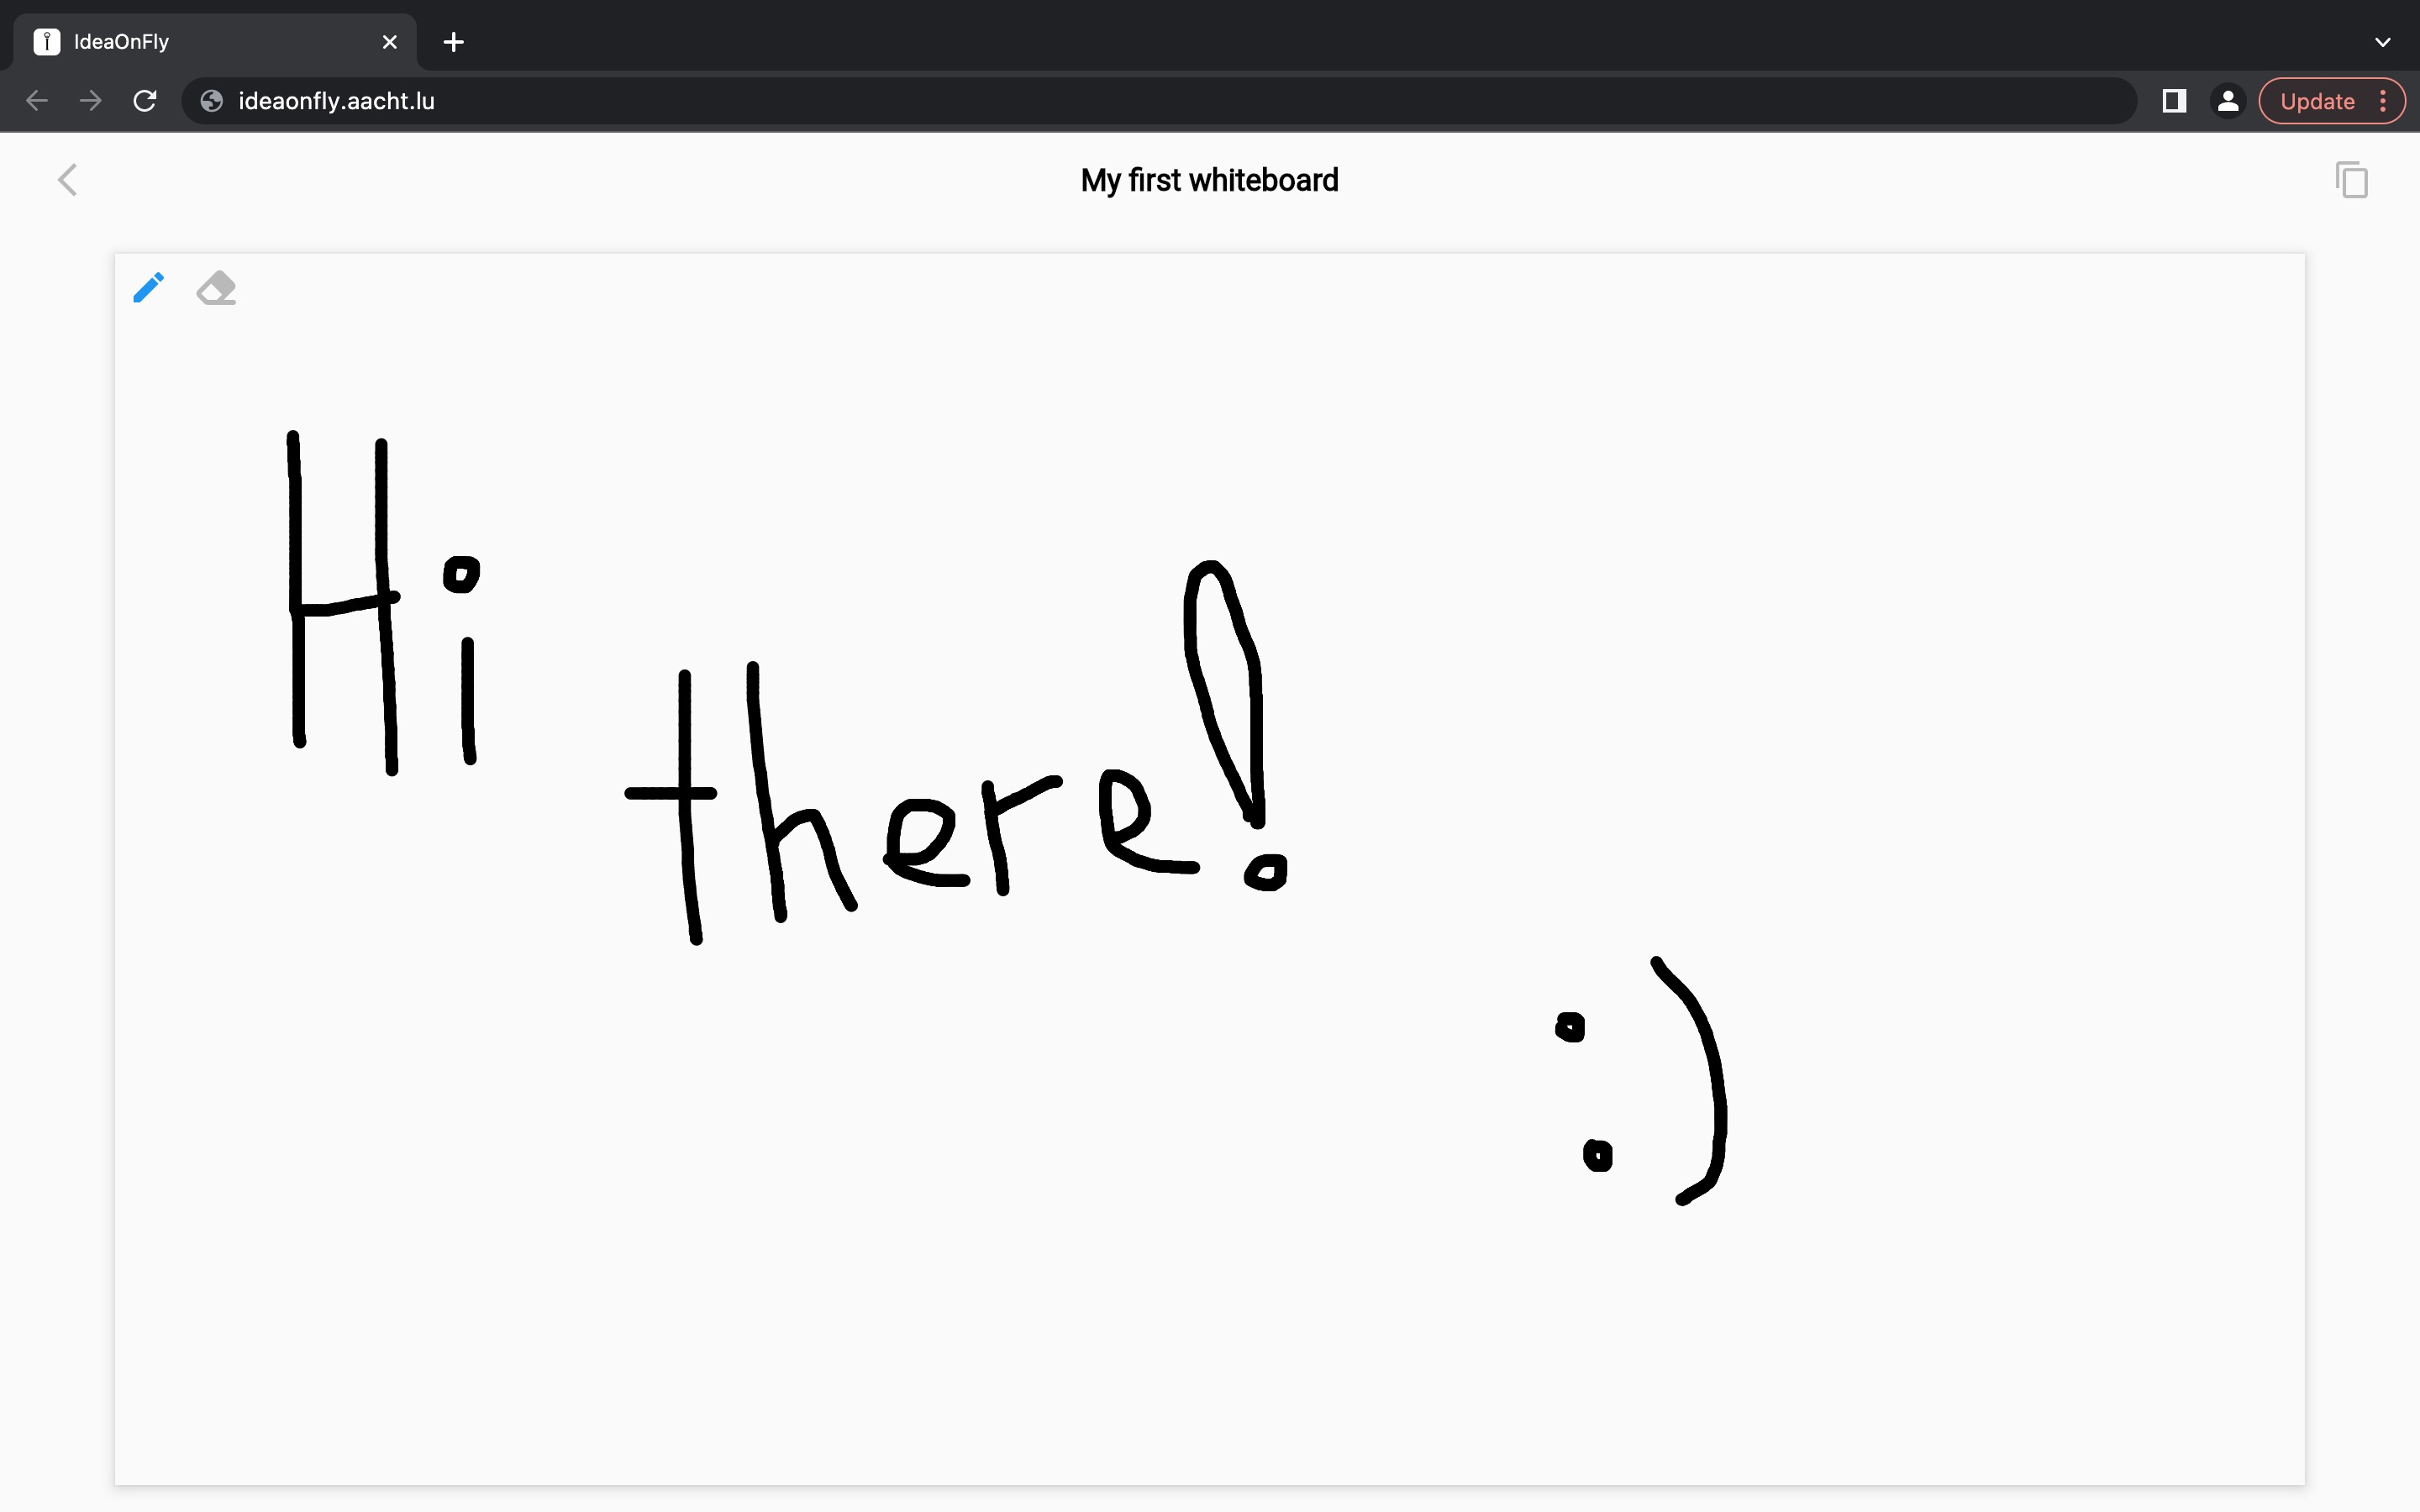 Main whiteboard's page in application